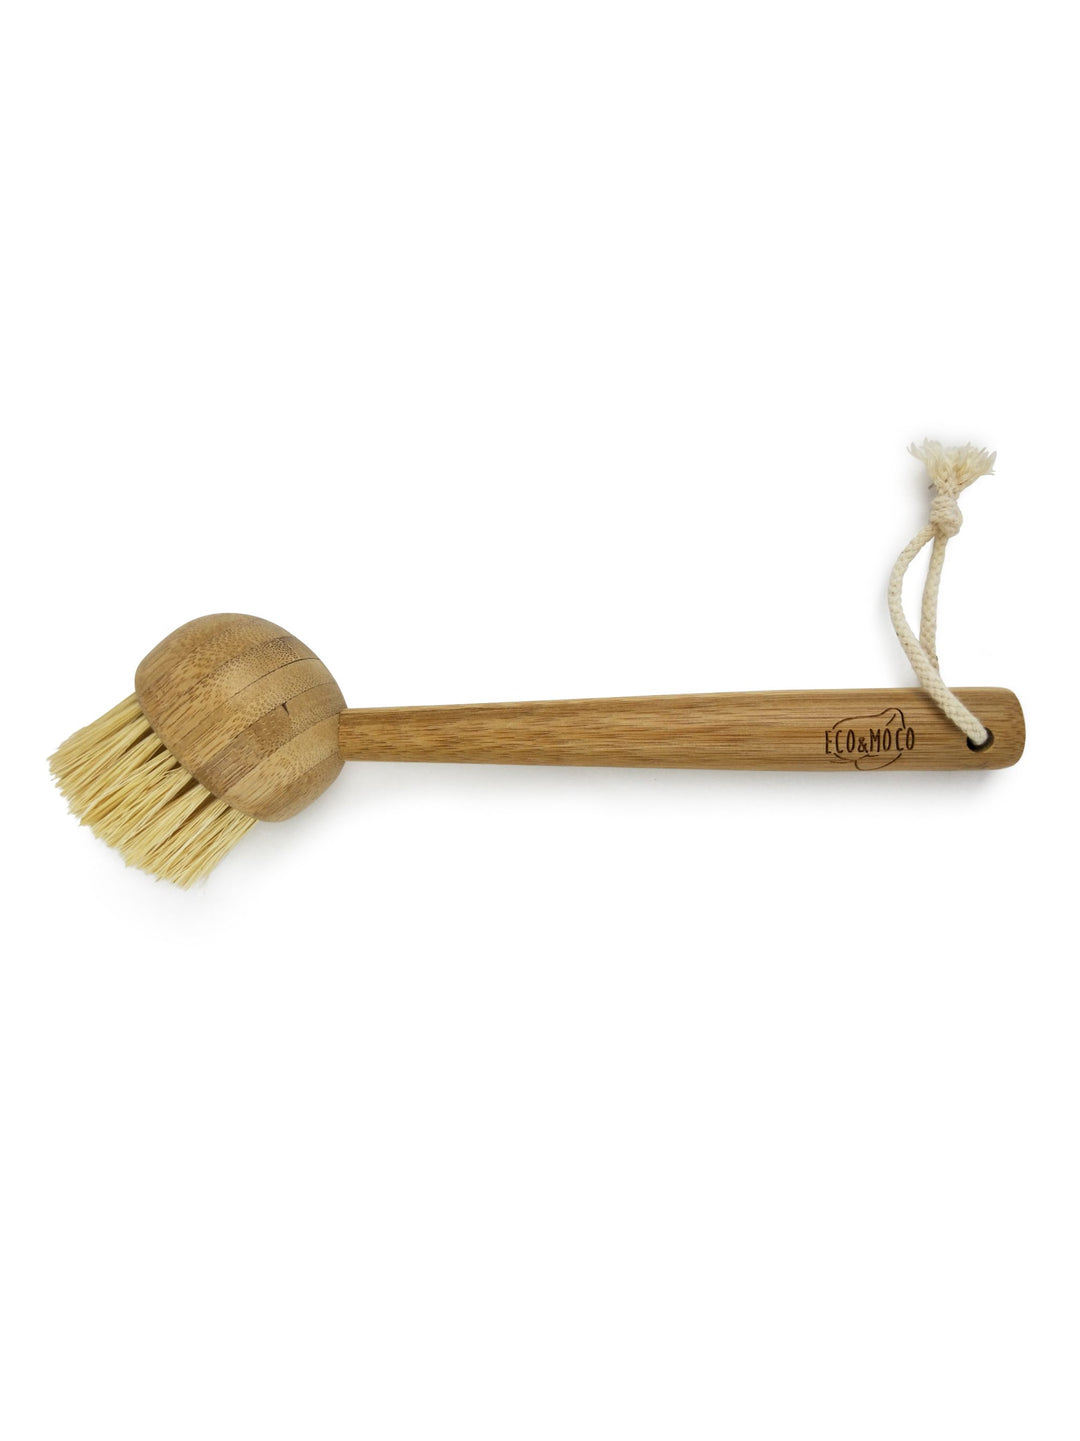 Dish Brush Long Handle Soft Bristle from Eco and Moco